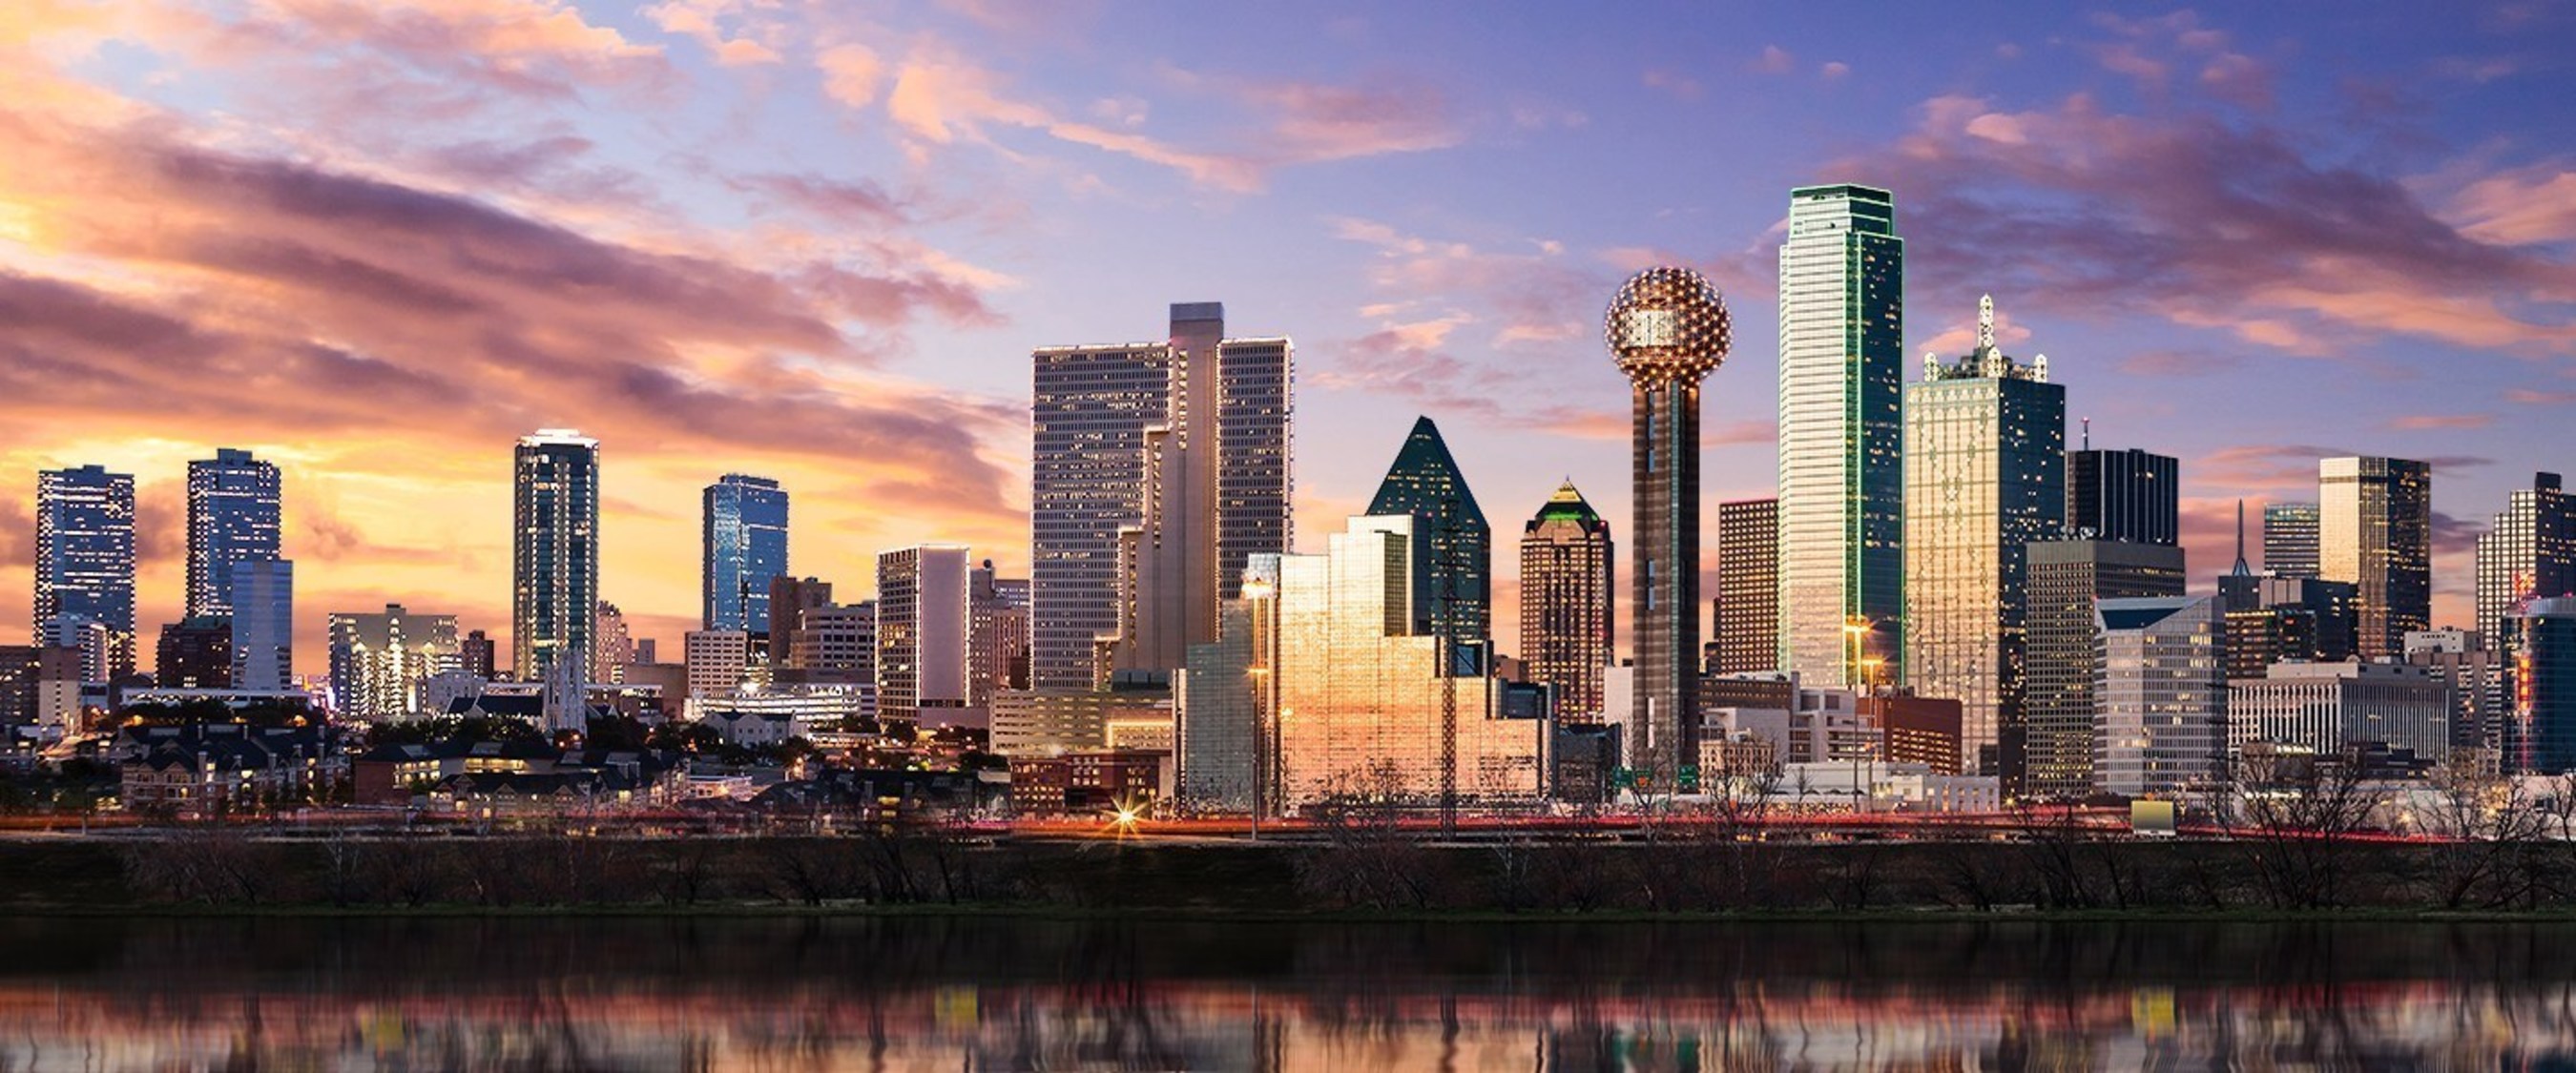 Dallas - Fort Worth - Arlington MSA: Ranked 4th largest city by population in USA